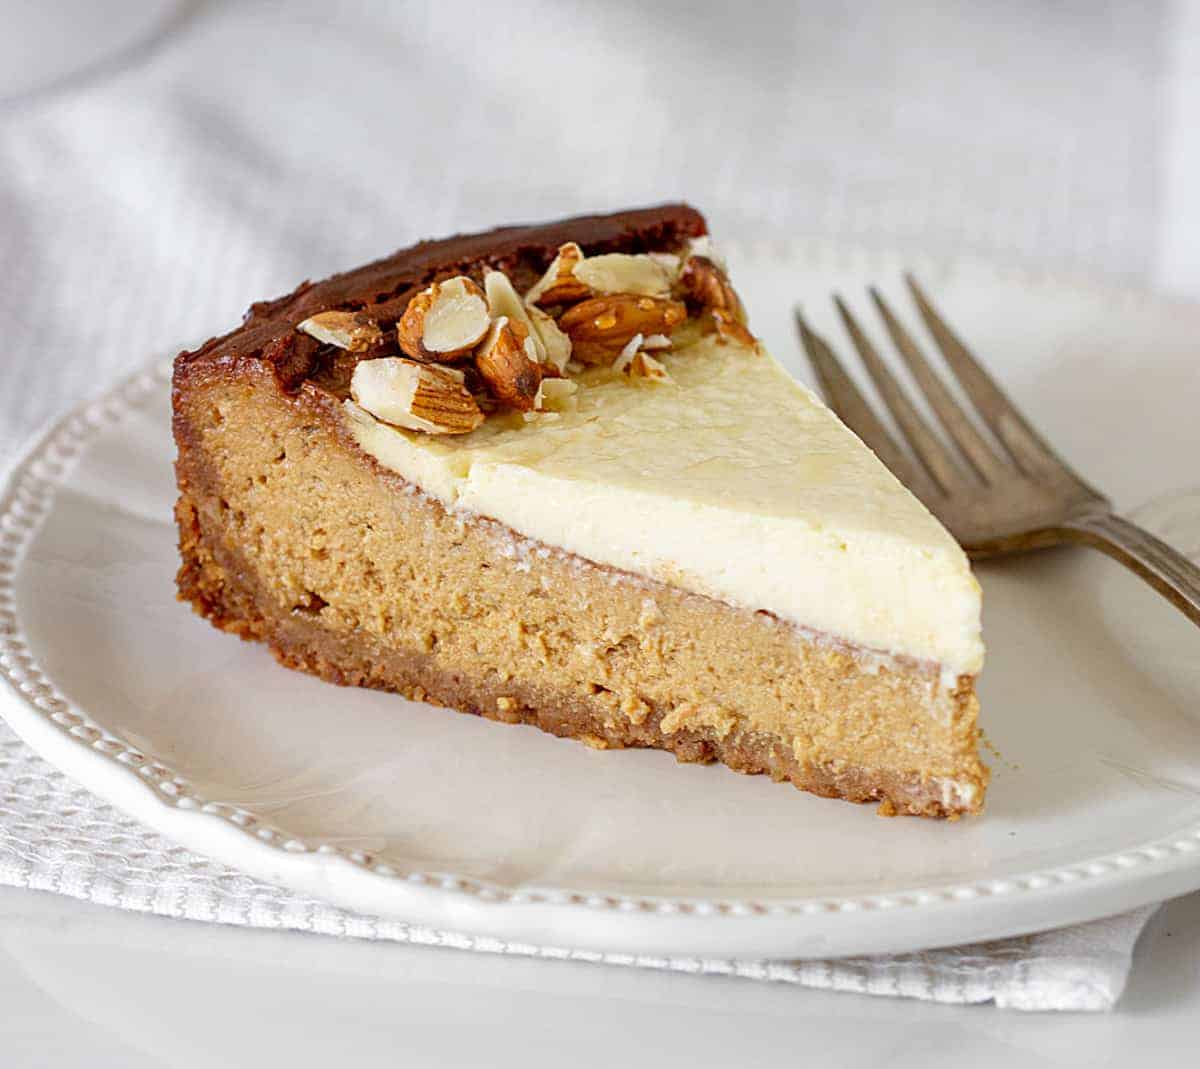 Slice of brown sugar cheesecake on a white plate with a silver fork. White surface.